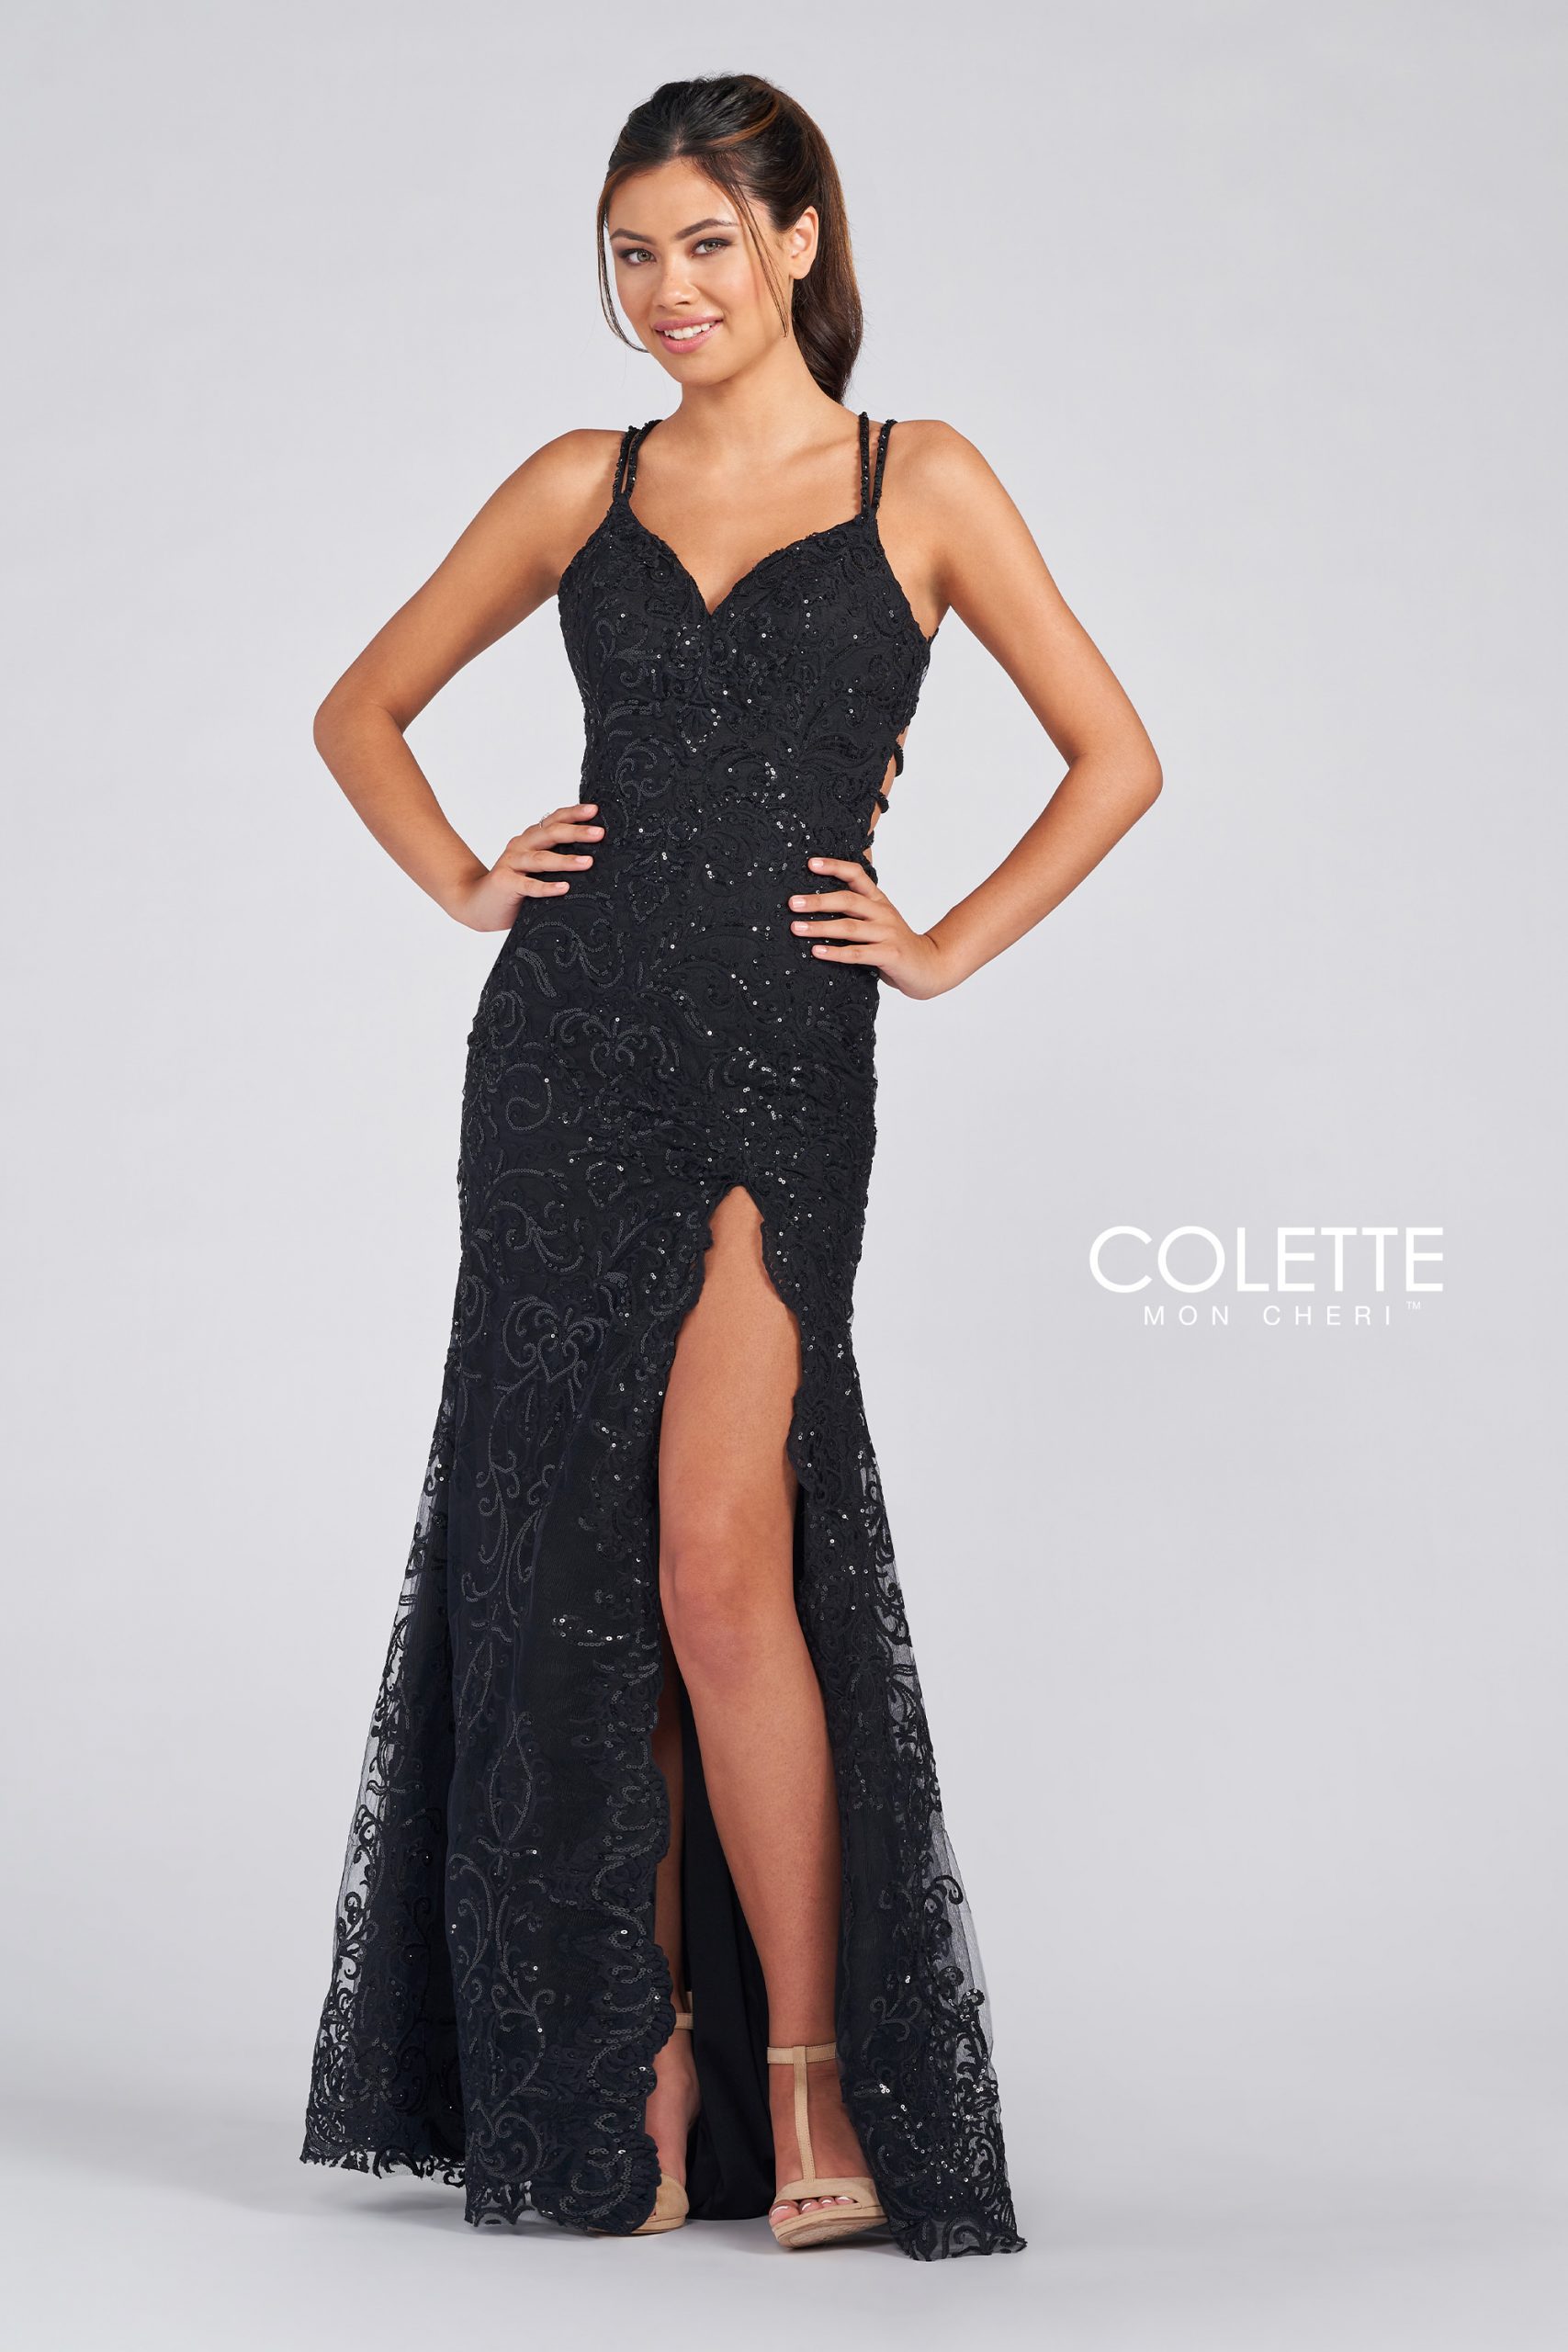 CL12280 - Colette dresses available at Lisa's Bridal